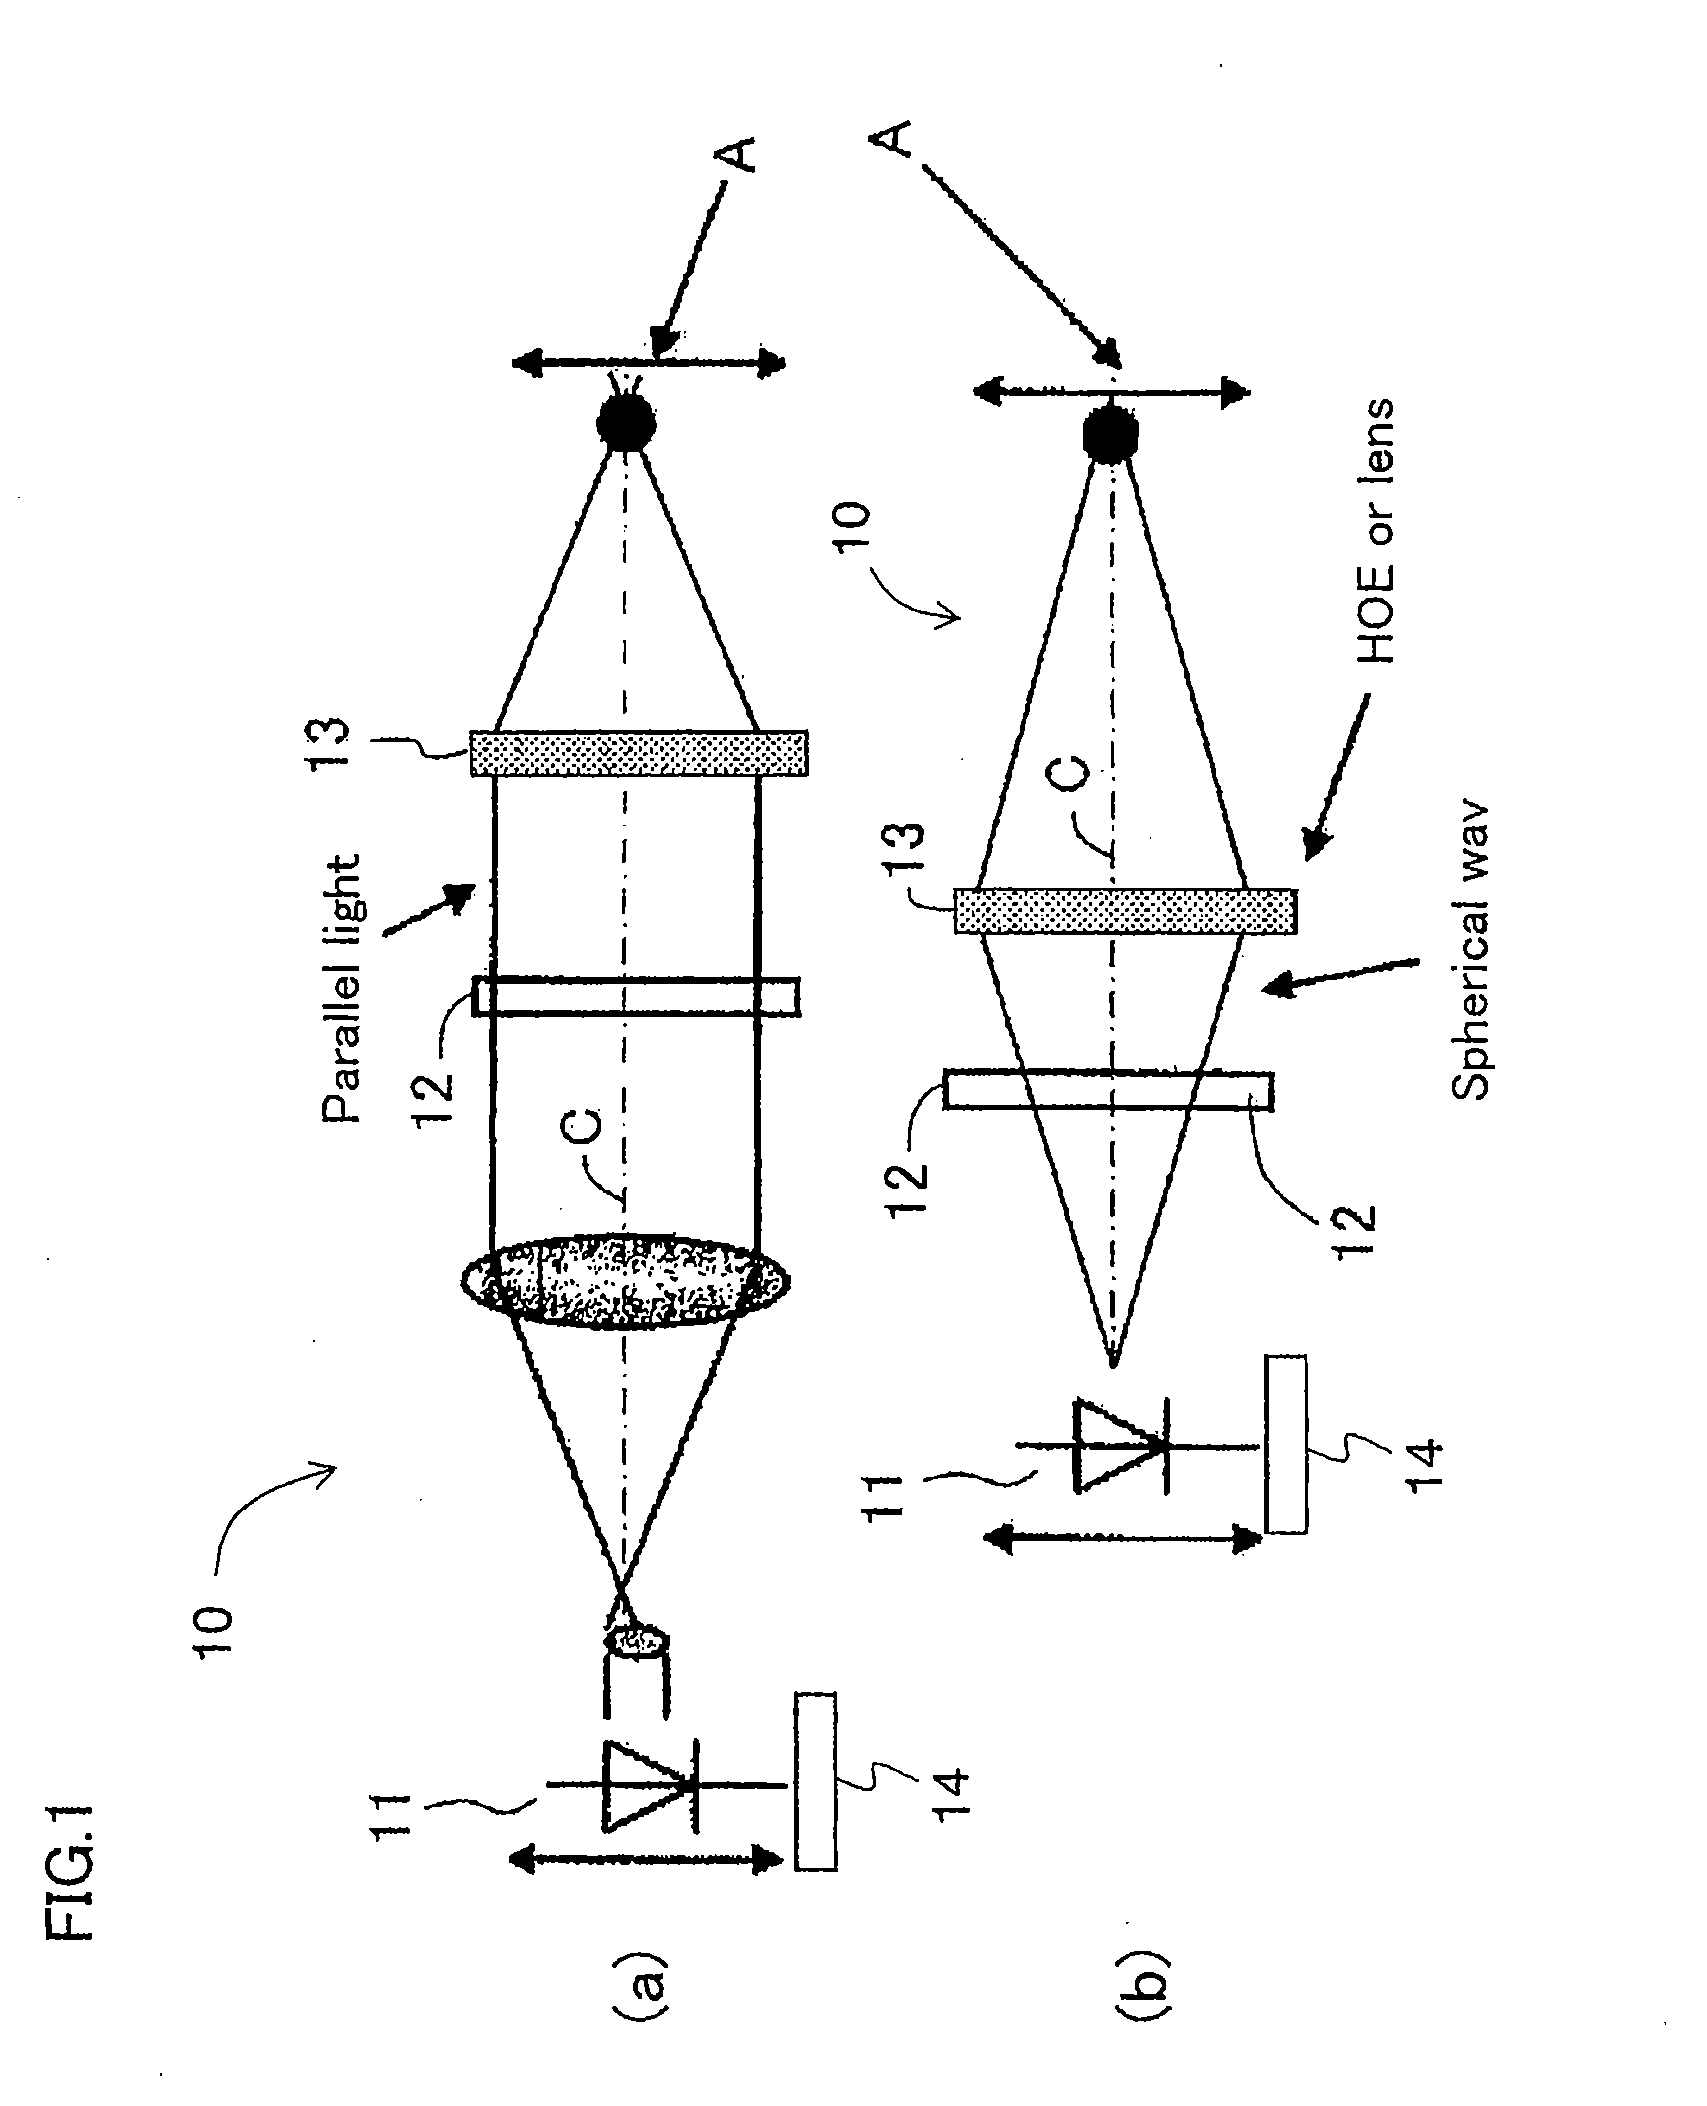 Image Display Unit and Electronic Glasses